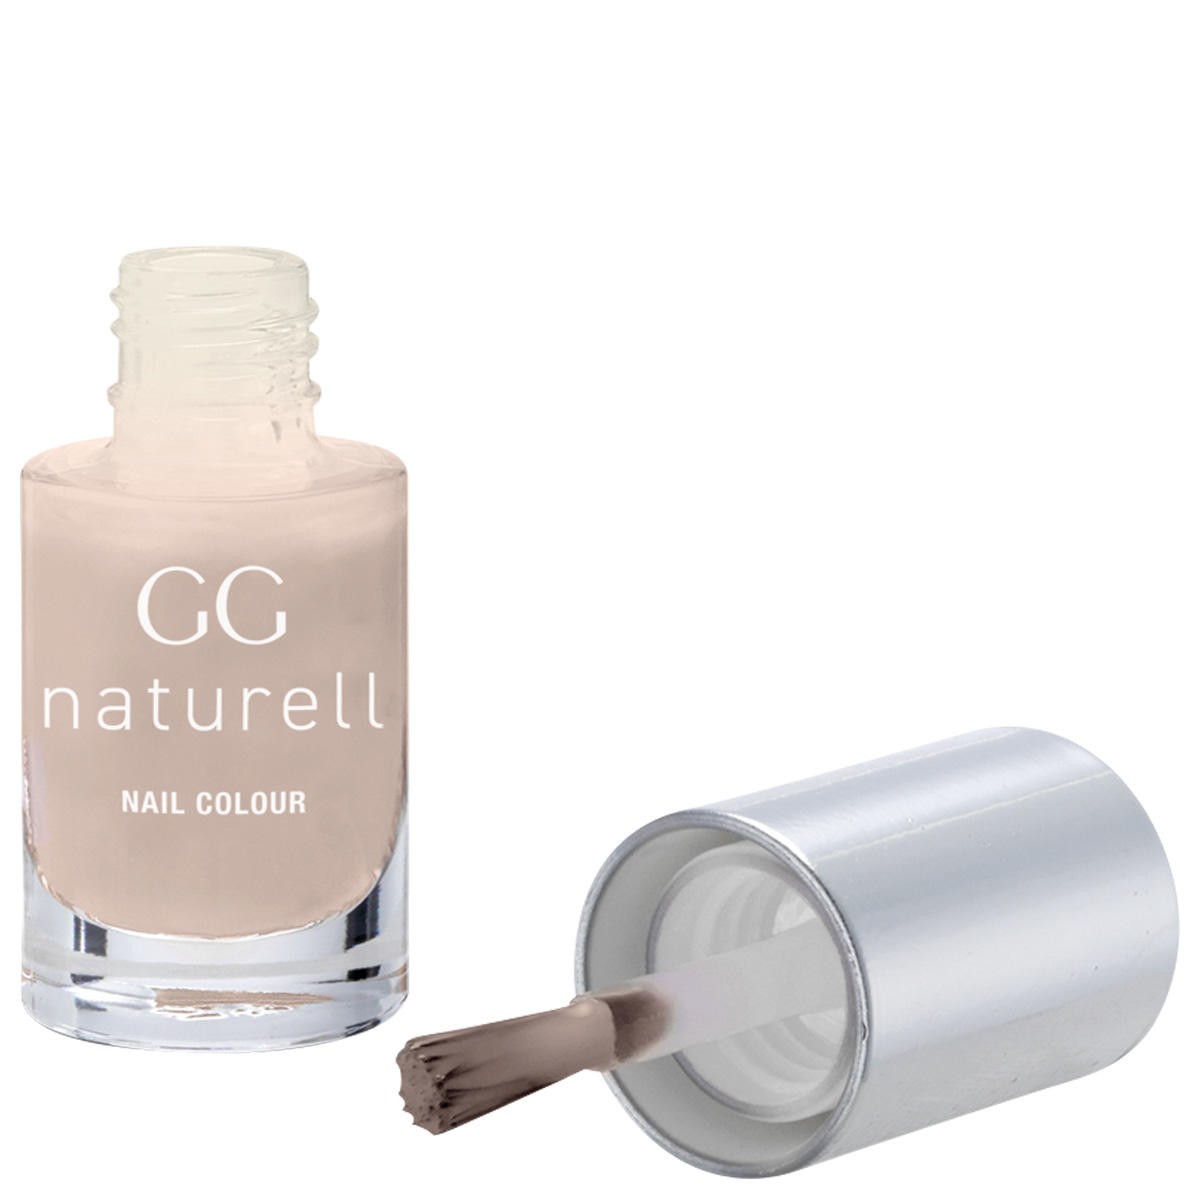 GERTRAUD GRUBER GG naturell Nail Colour 10 Nude 5 ml